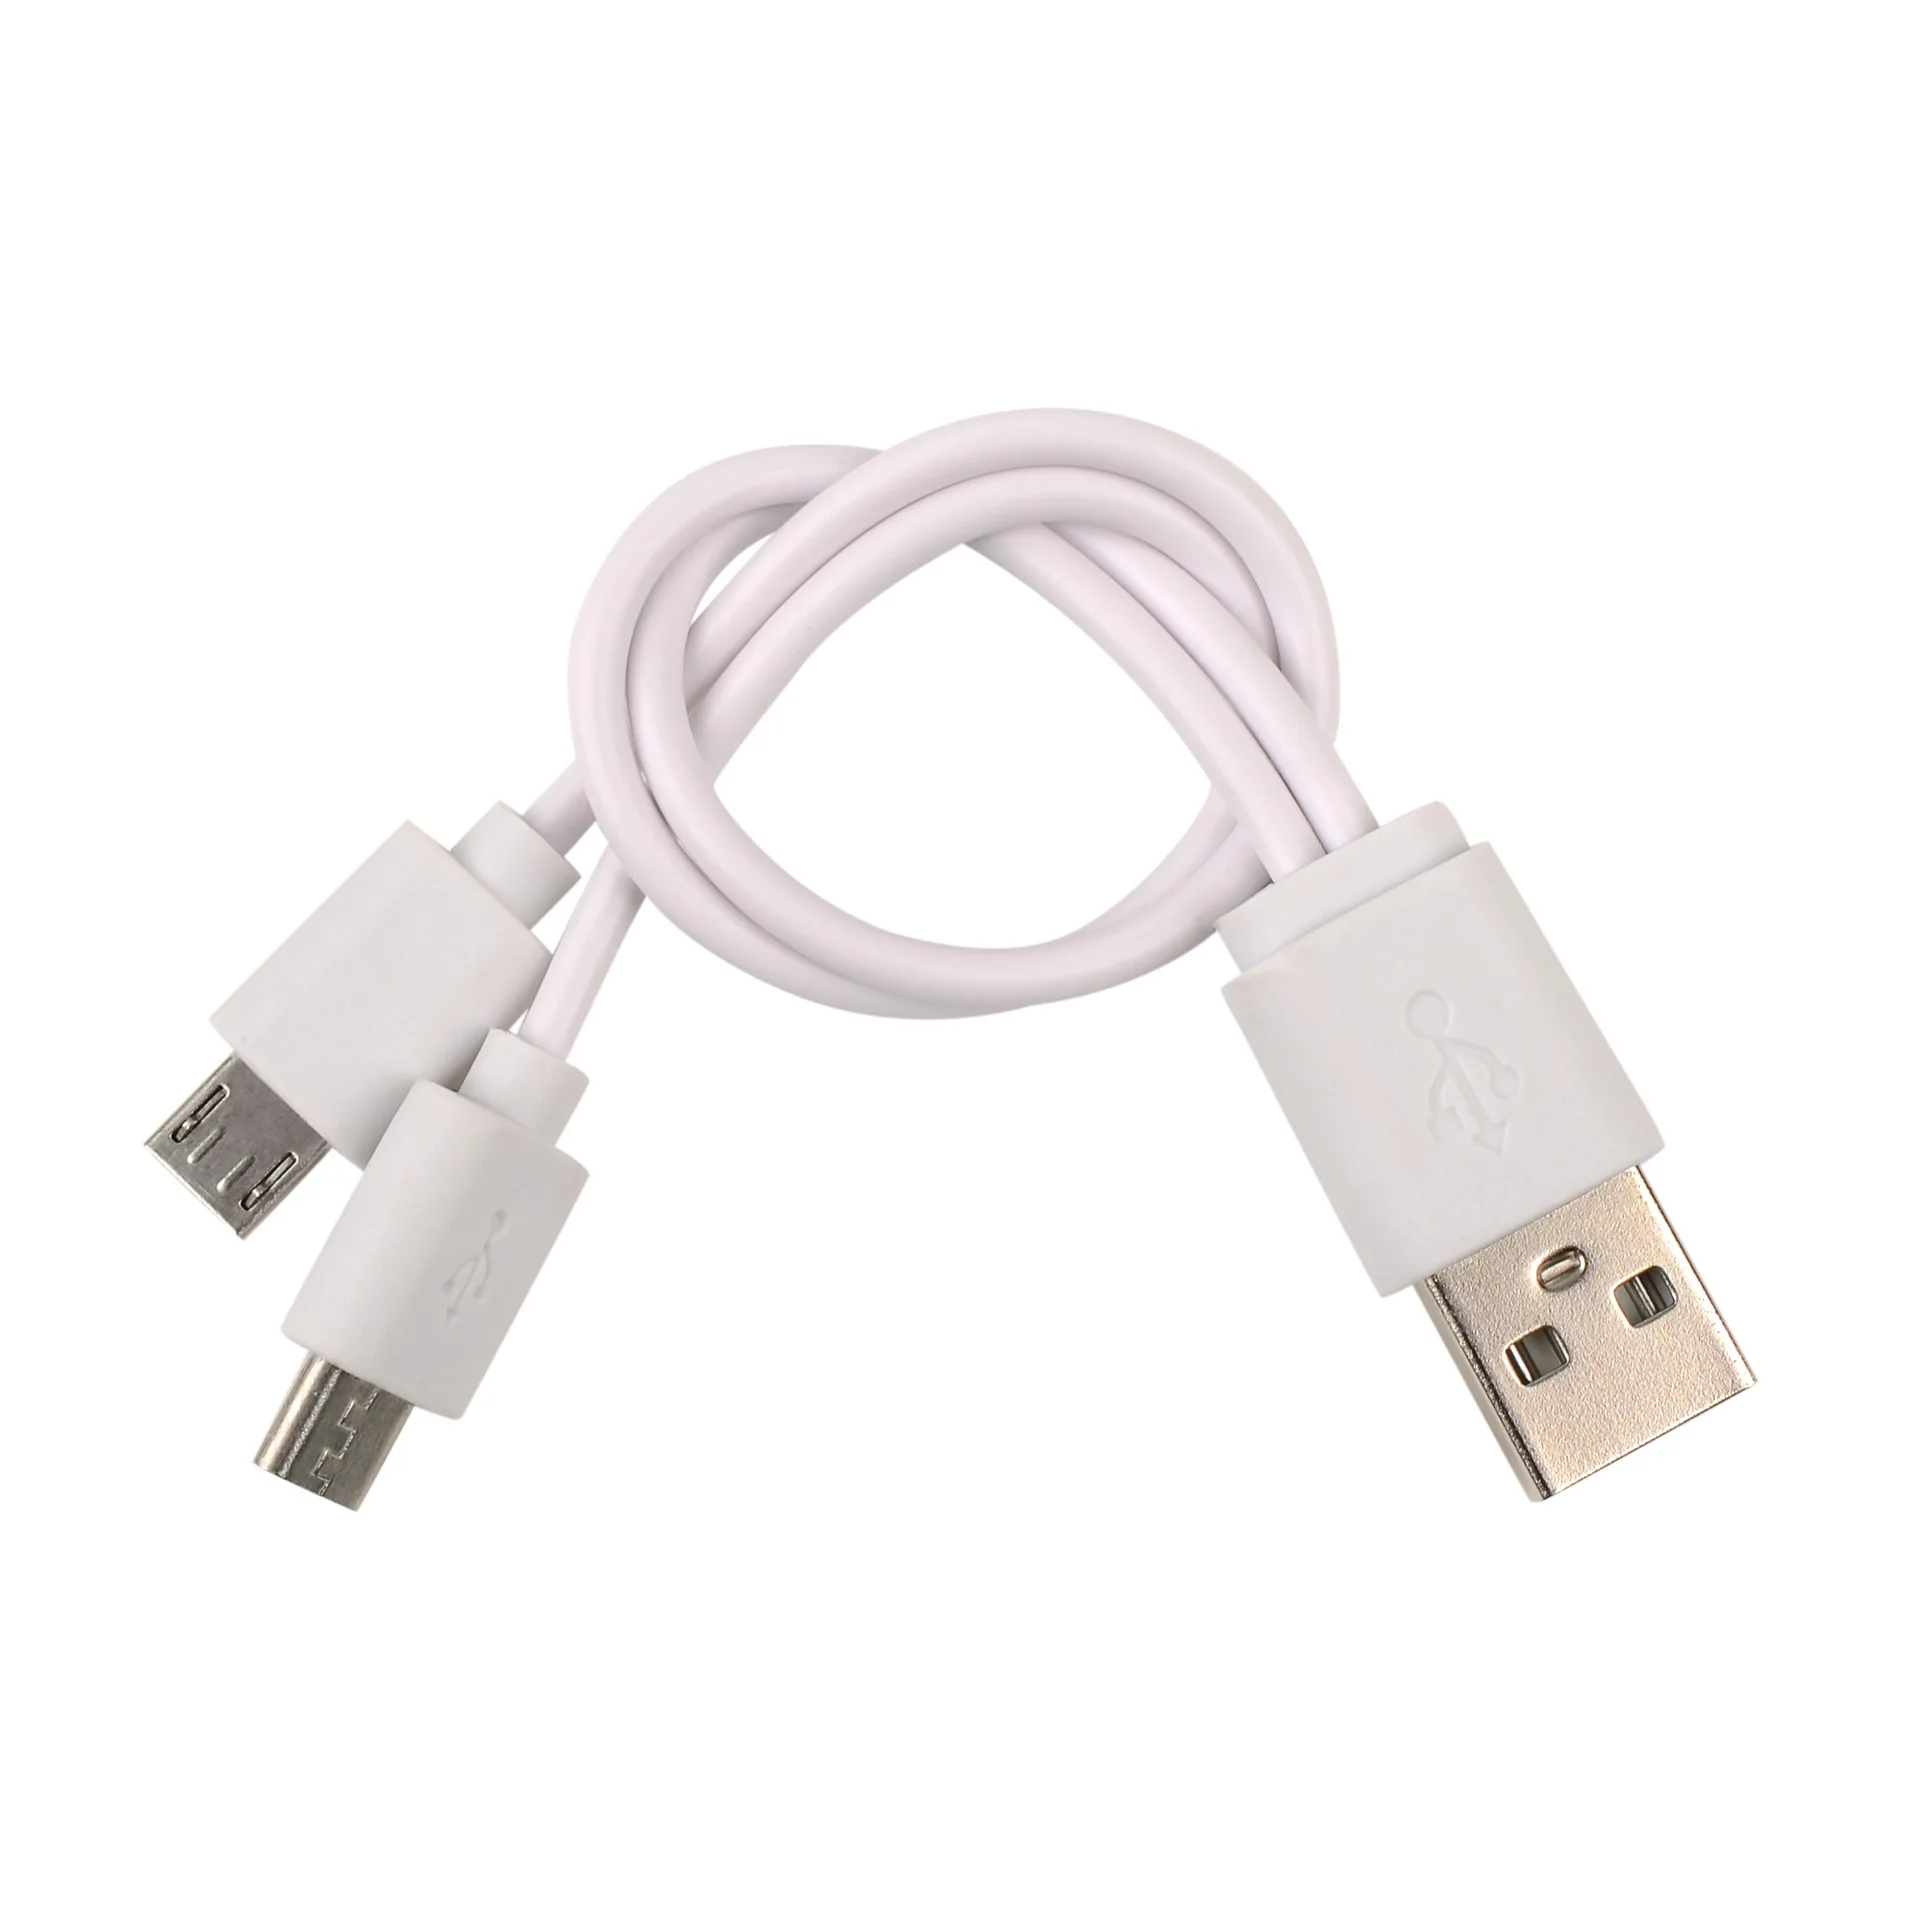 1 to 2 Android micro USB fast charging cable two headed Android two one mobile phone distribution cable m.alibaba.com